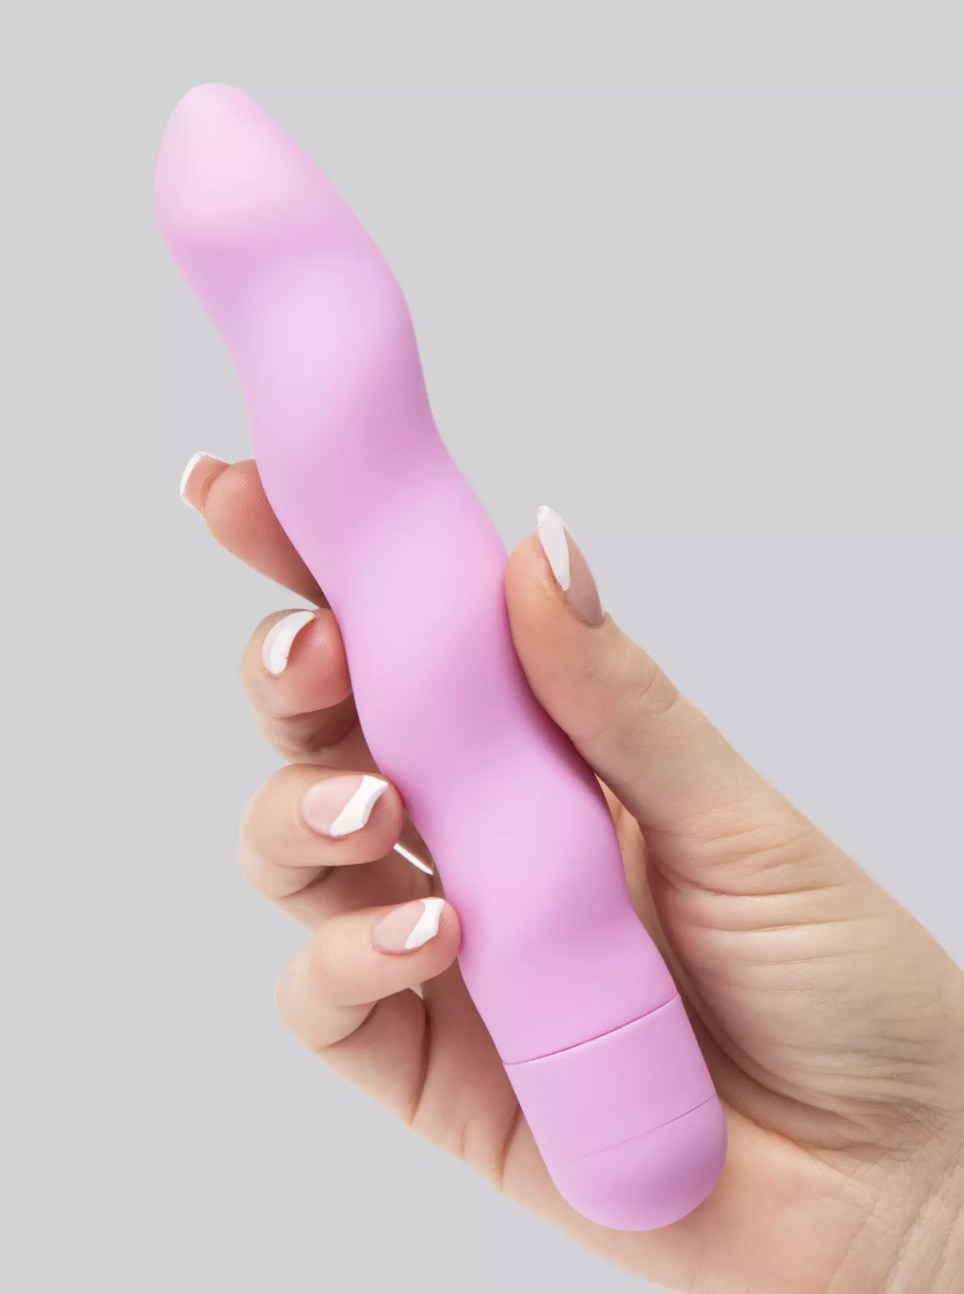 The pink wavy vibrator held in someone&#x27;s hand